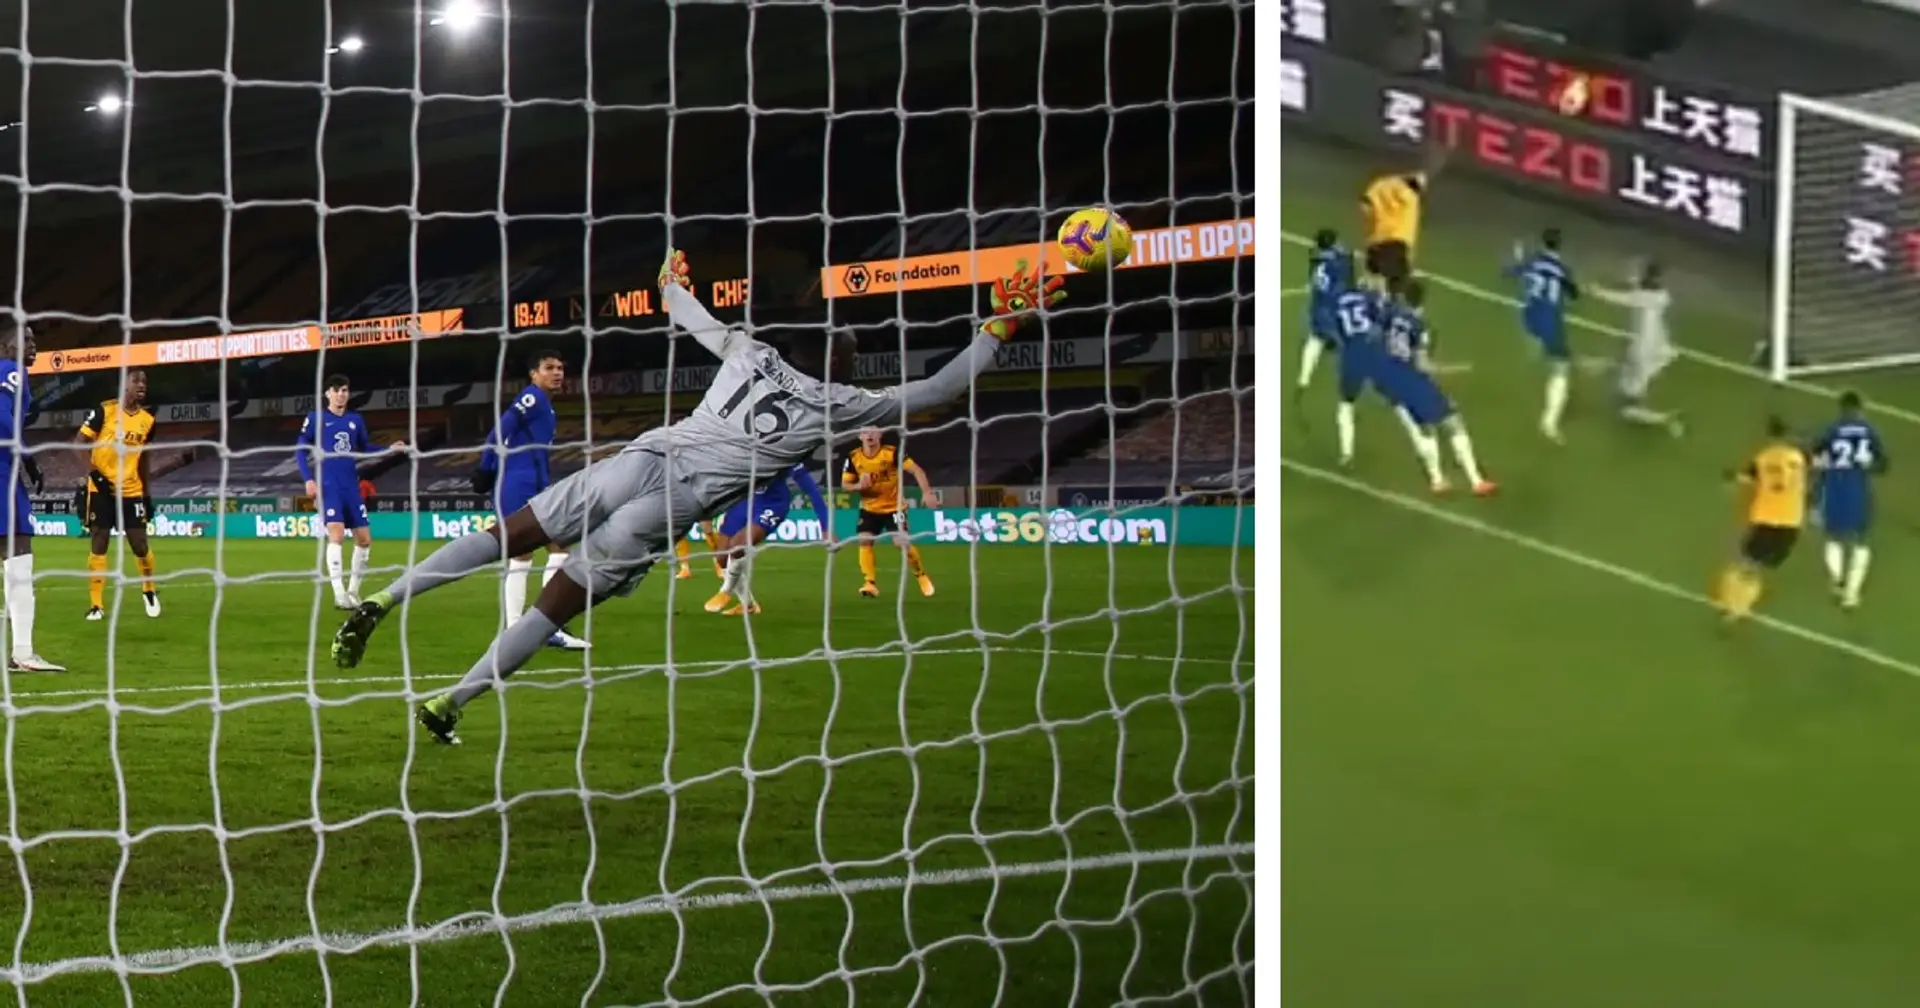 New angle shows why Wolves equalizer in 2-1 loss should never have counted